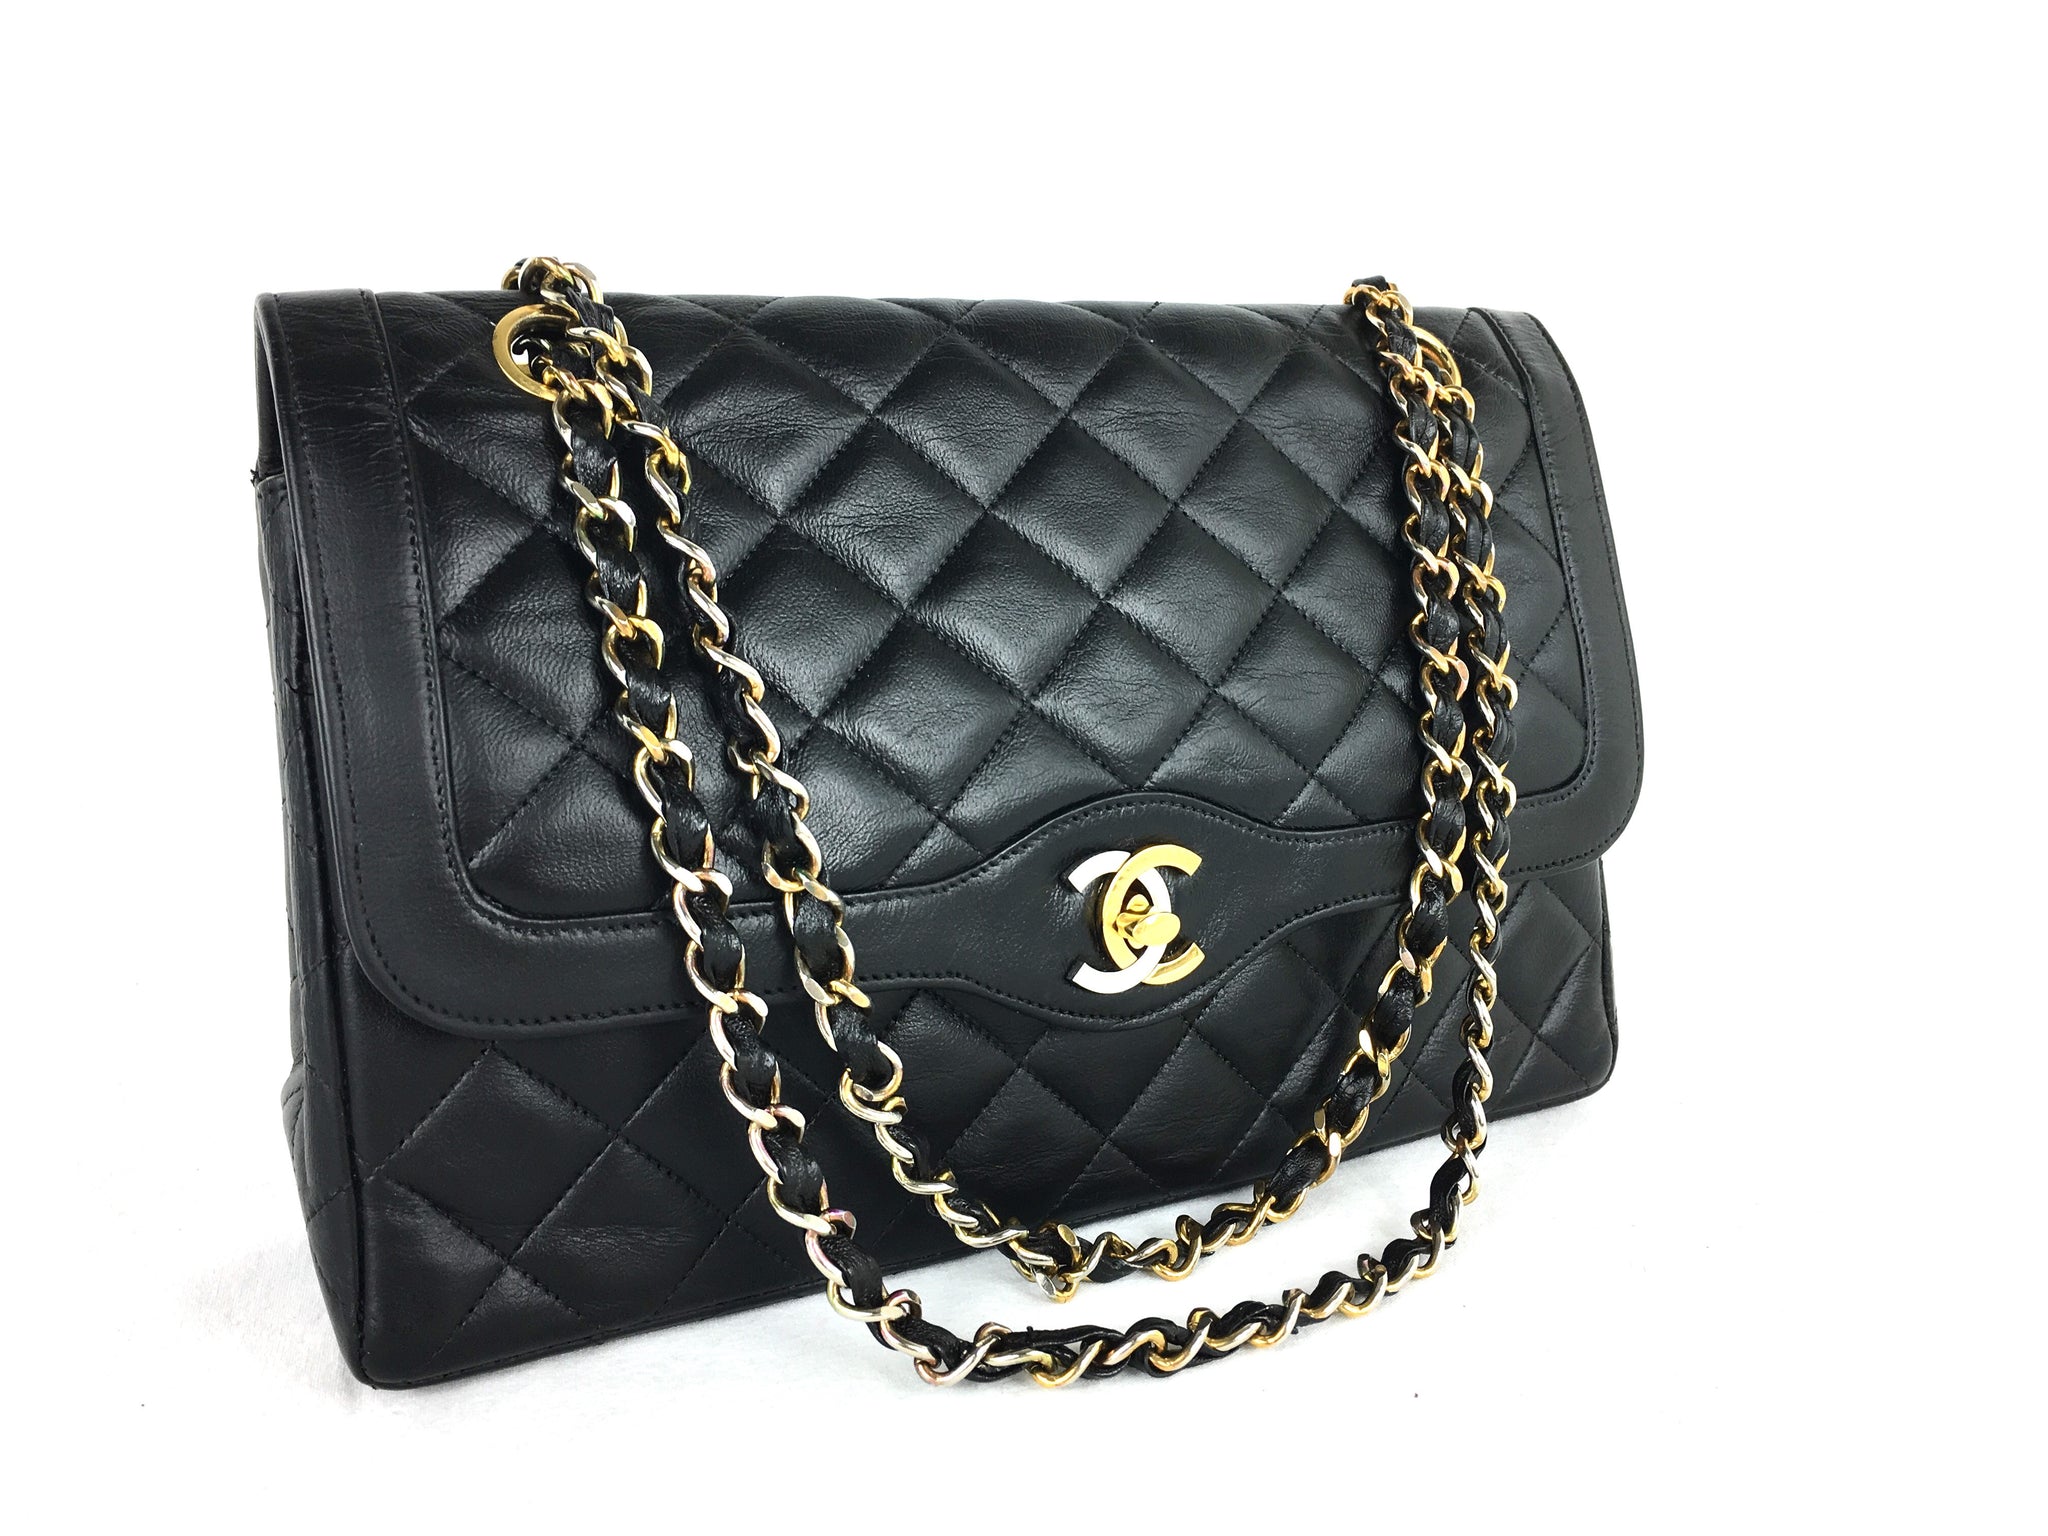 Additional photos of Chanel So Black Limited  Vintage chanel bag, Chanel  jumbo flap bag, Quilted handbags